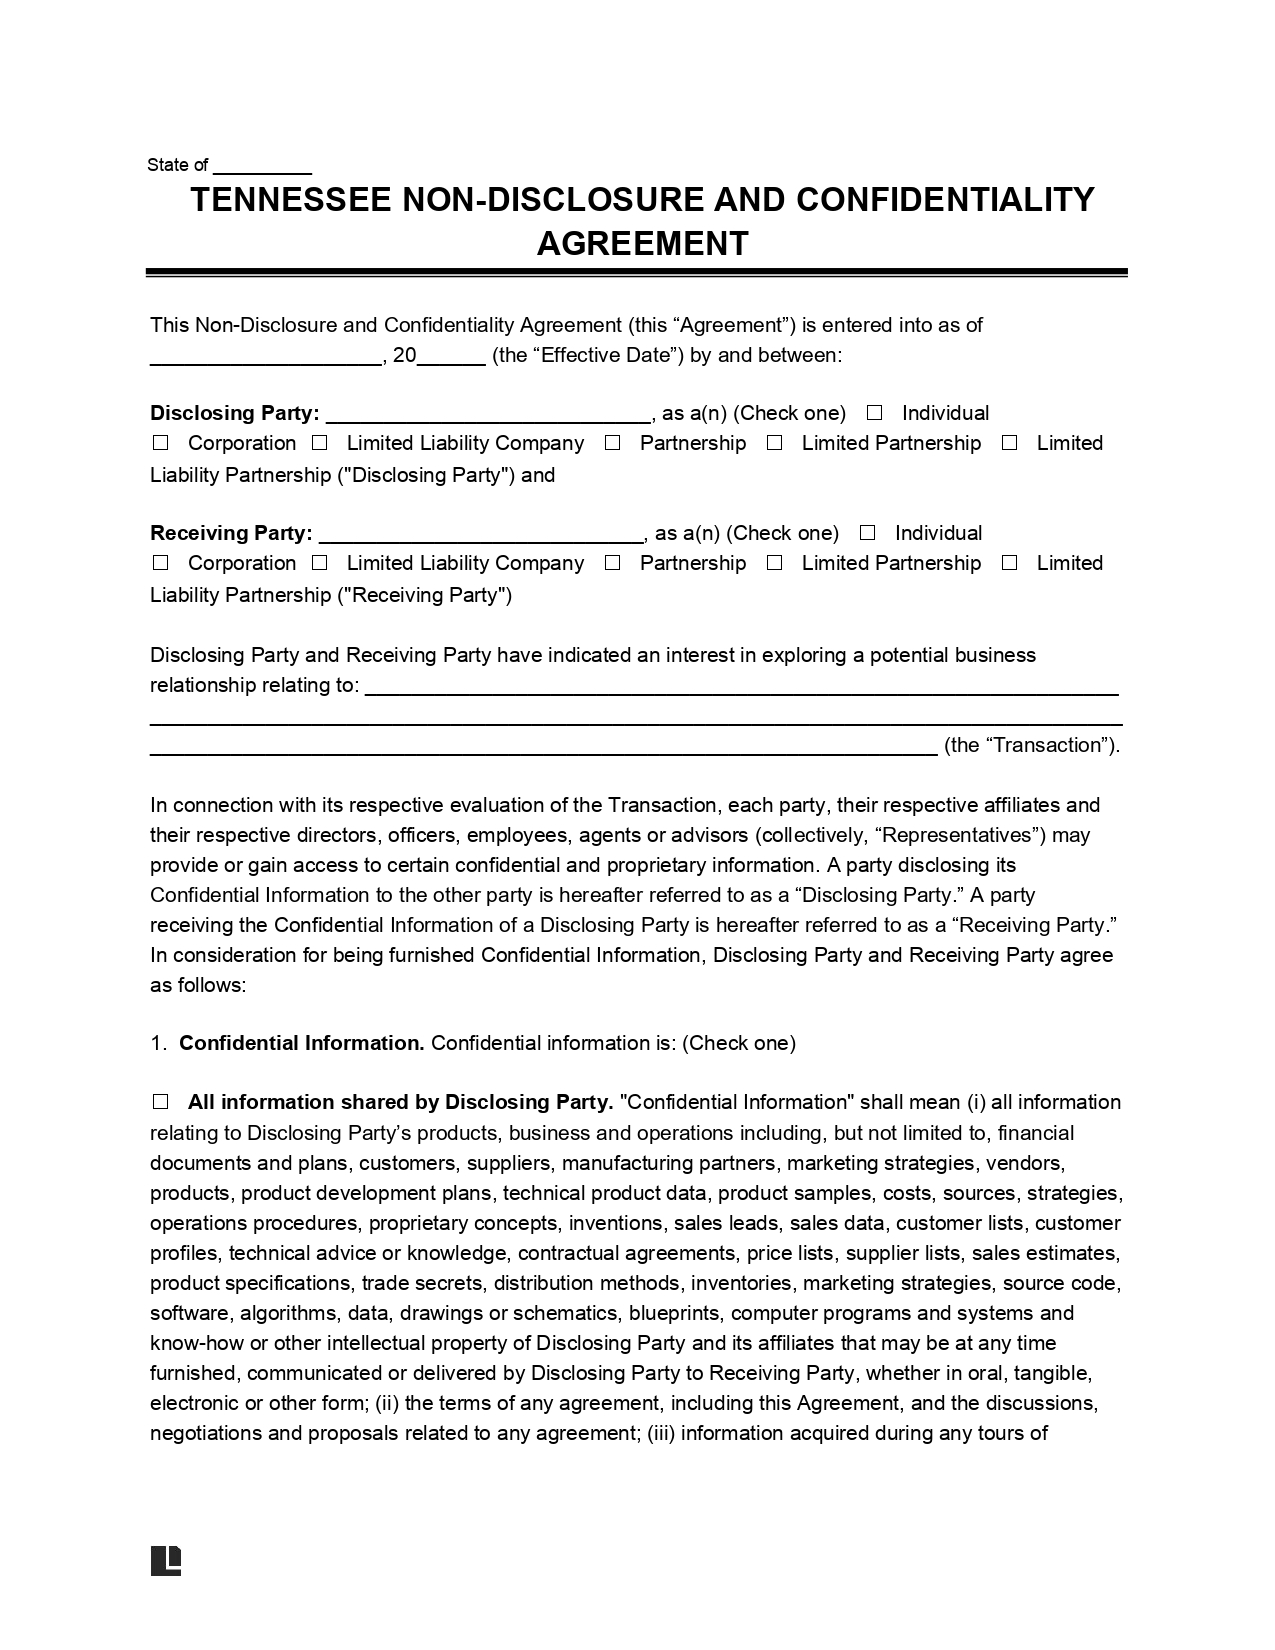 Tennessee Non-Disclosure Agreement Template